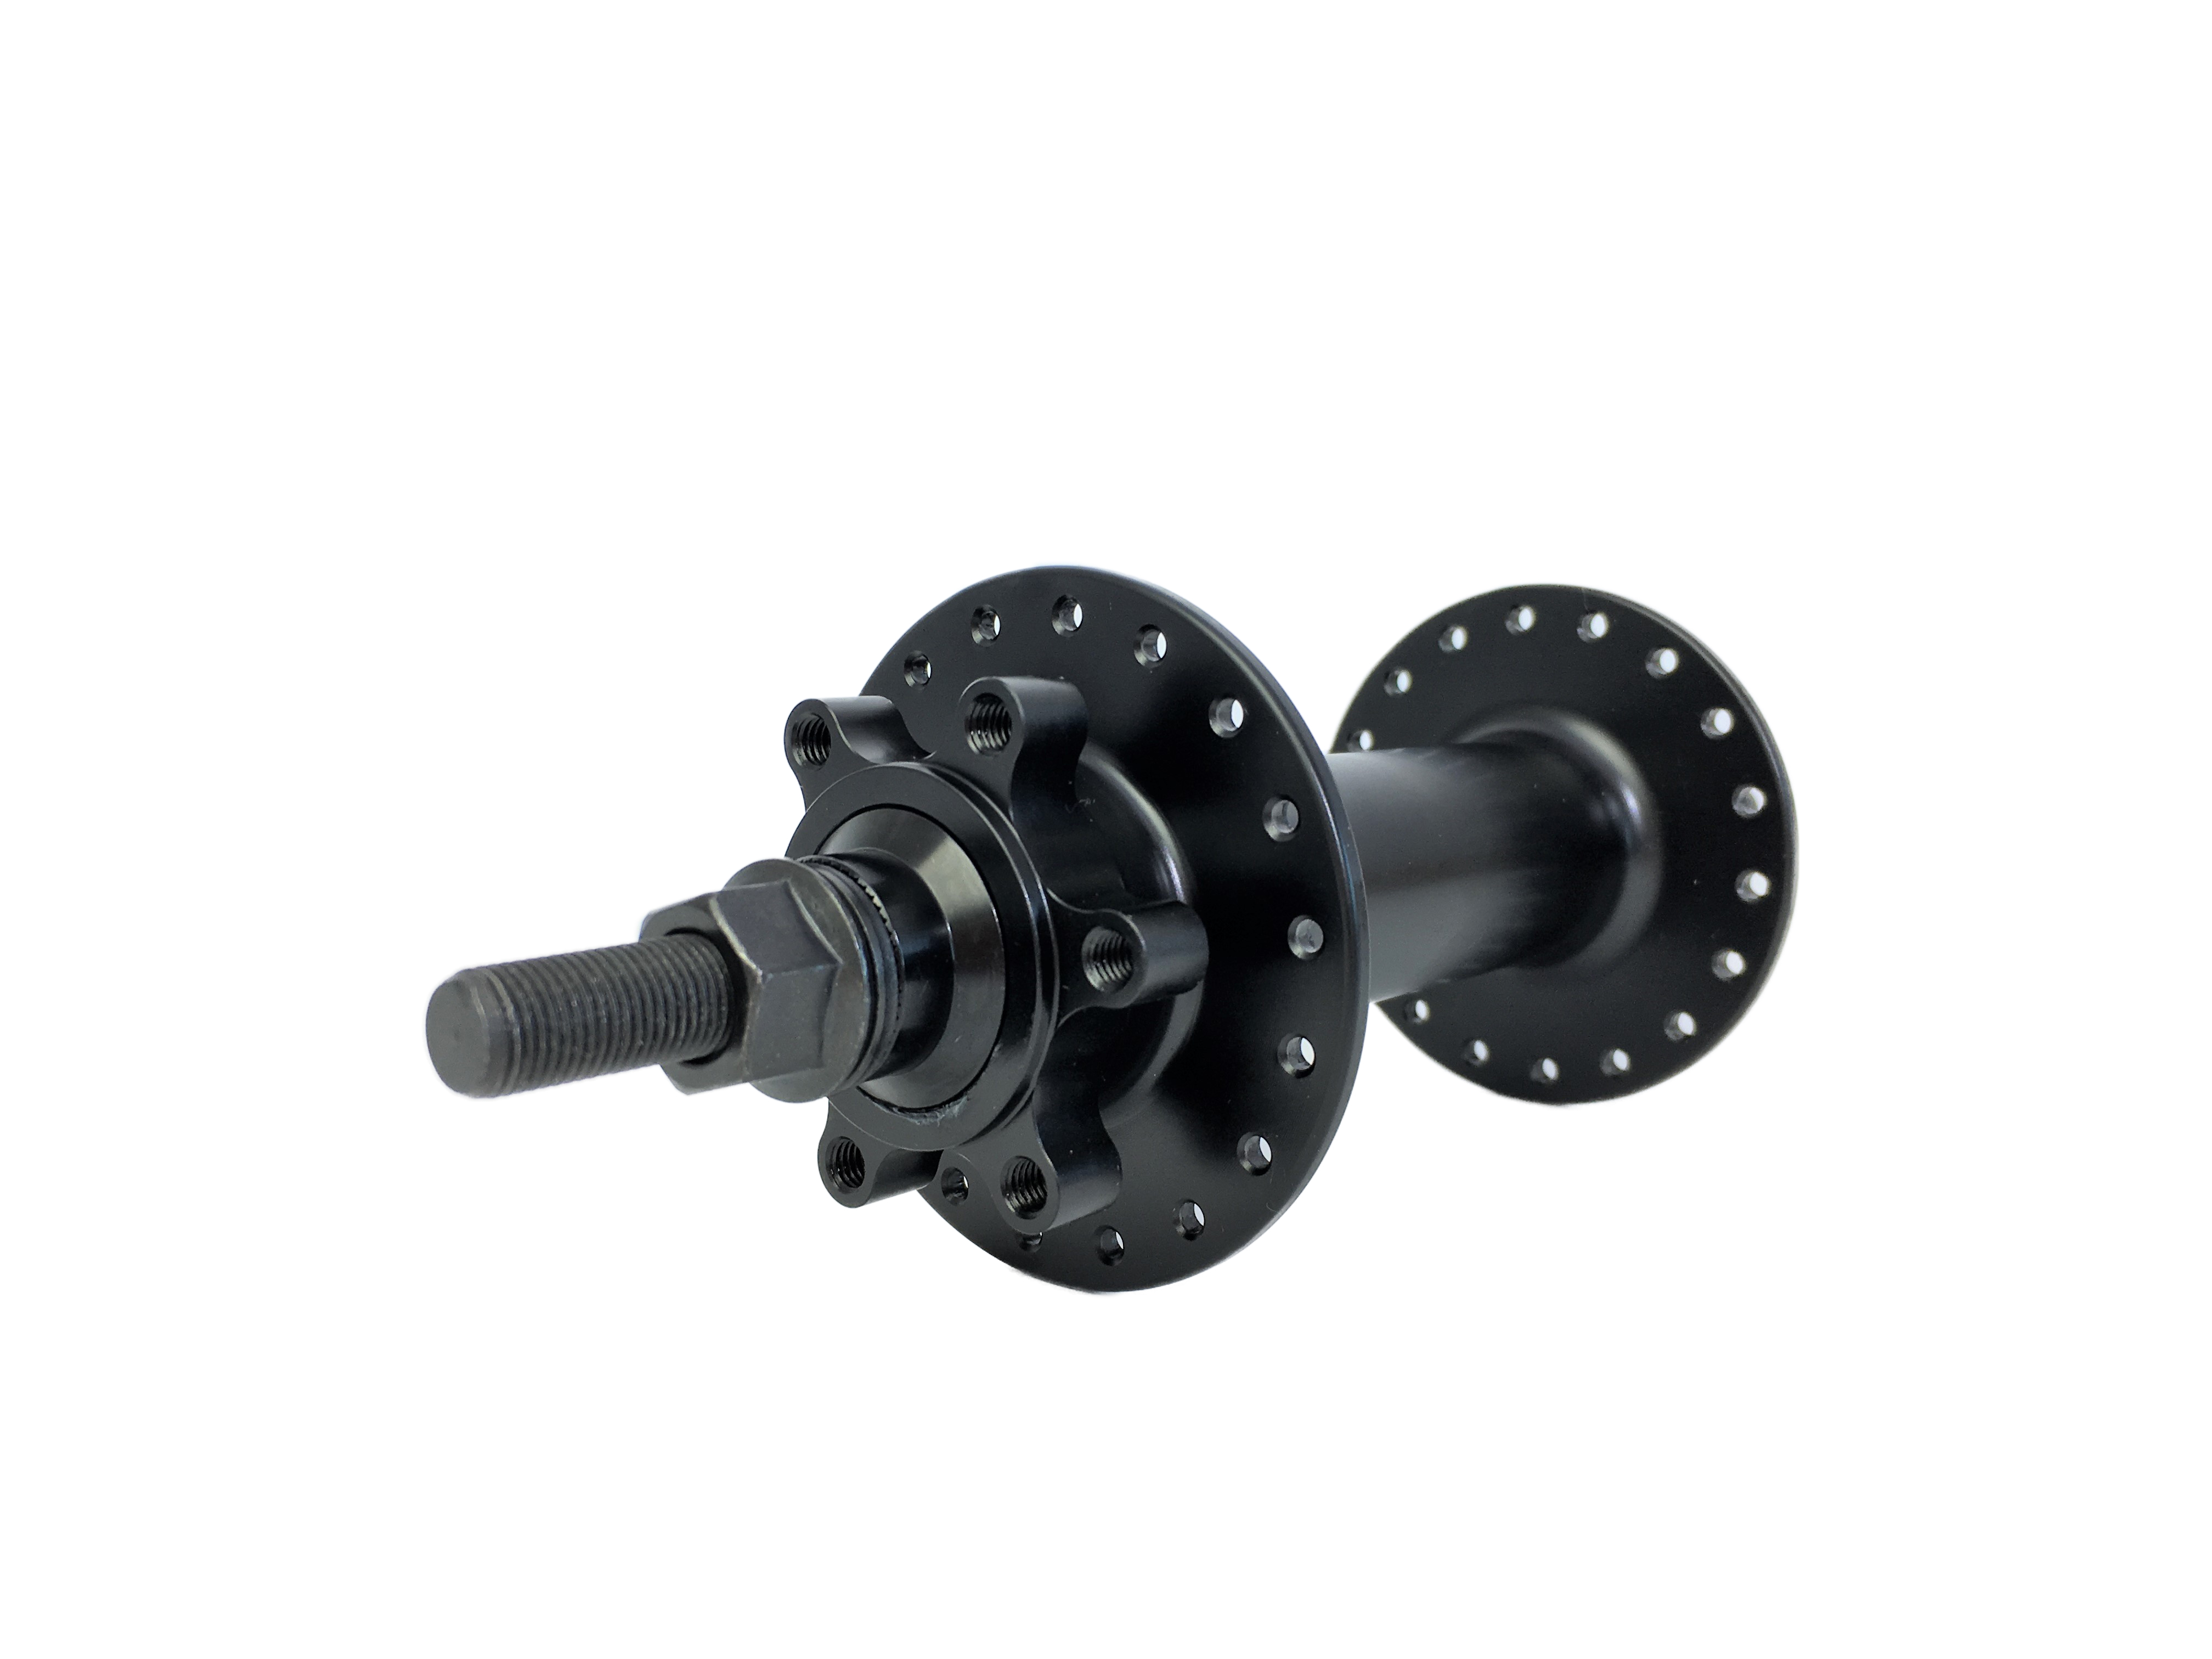 Extra wide Front Hub for 100mm rims for Disc Brakes